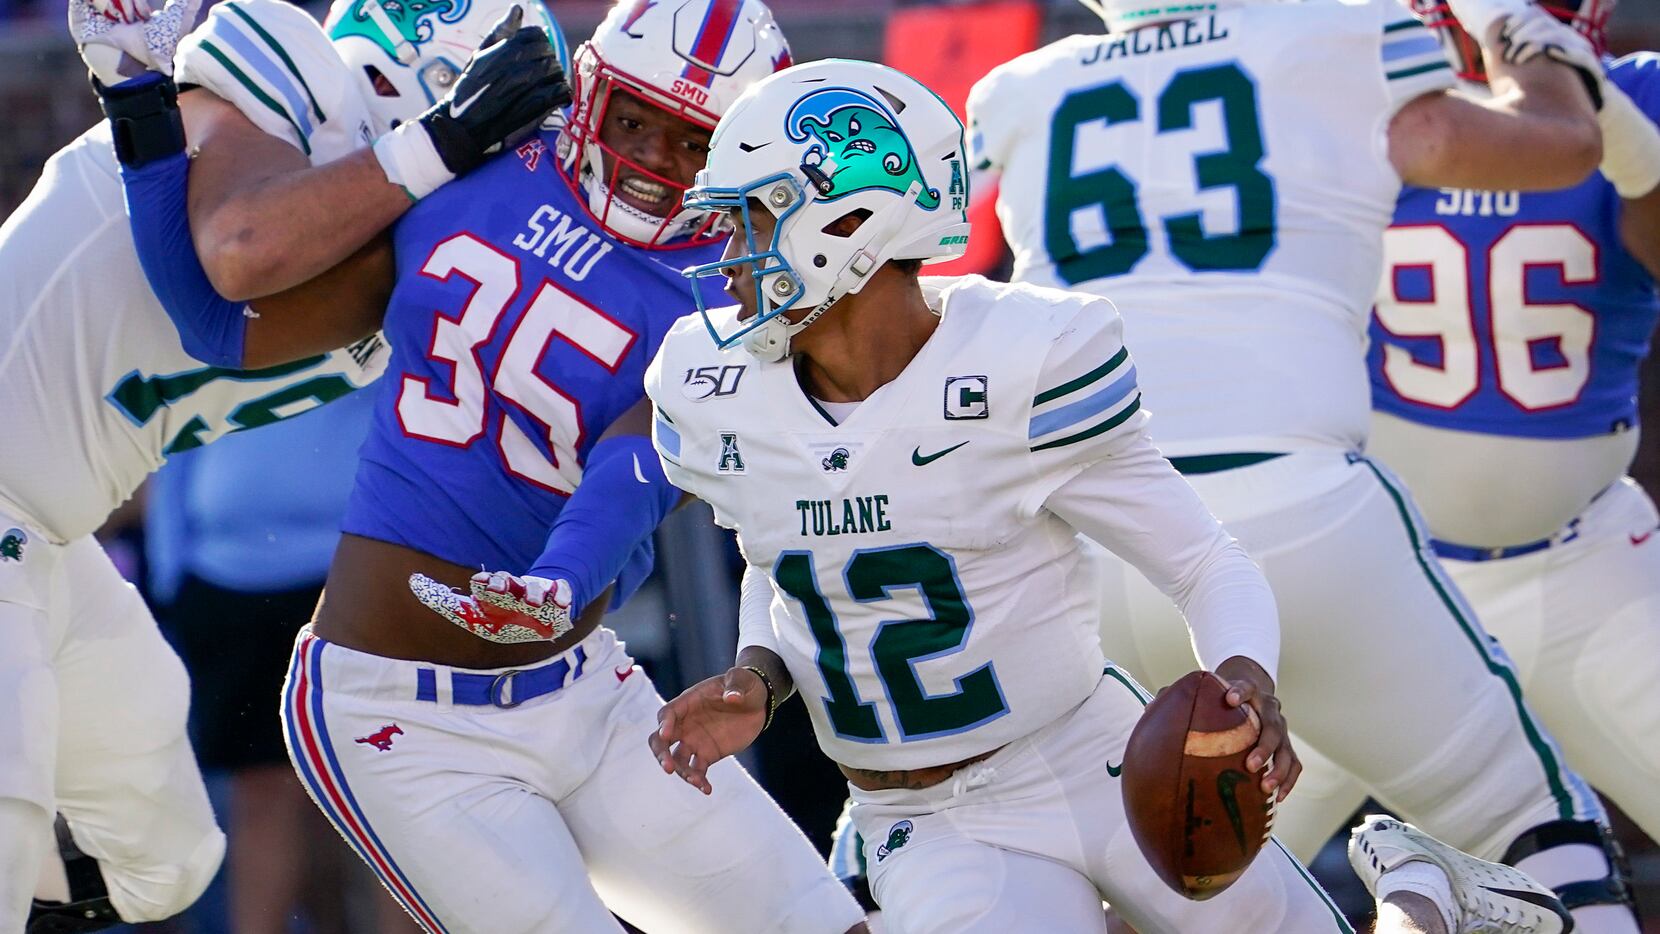 College football picks (Week 7): Predictions for SMU-Tulane, Texas  A&M-Mississippi St. and key national matchups